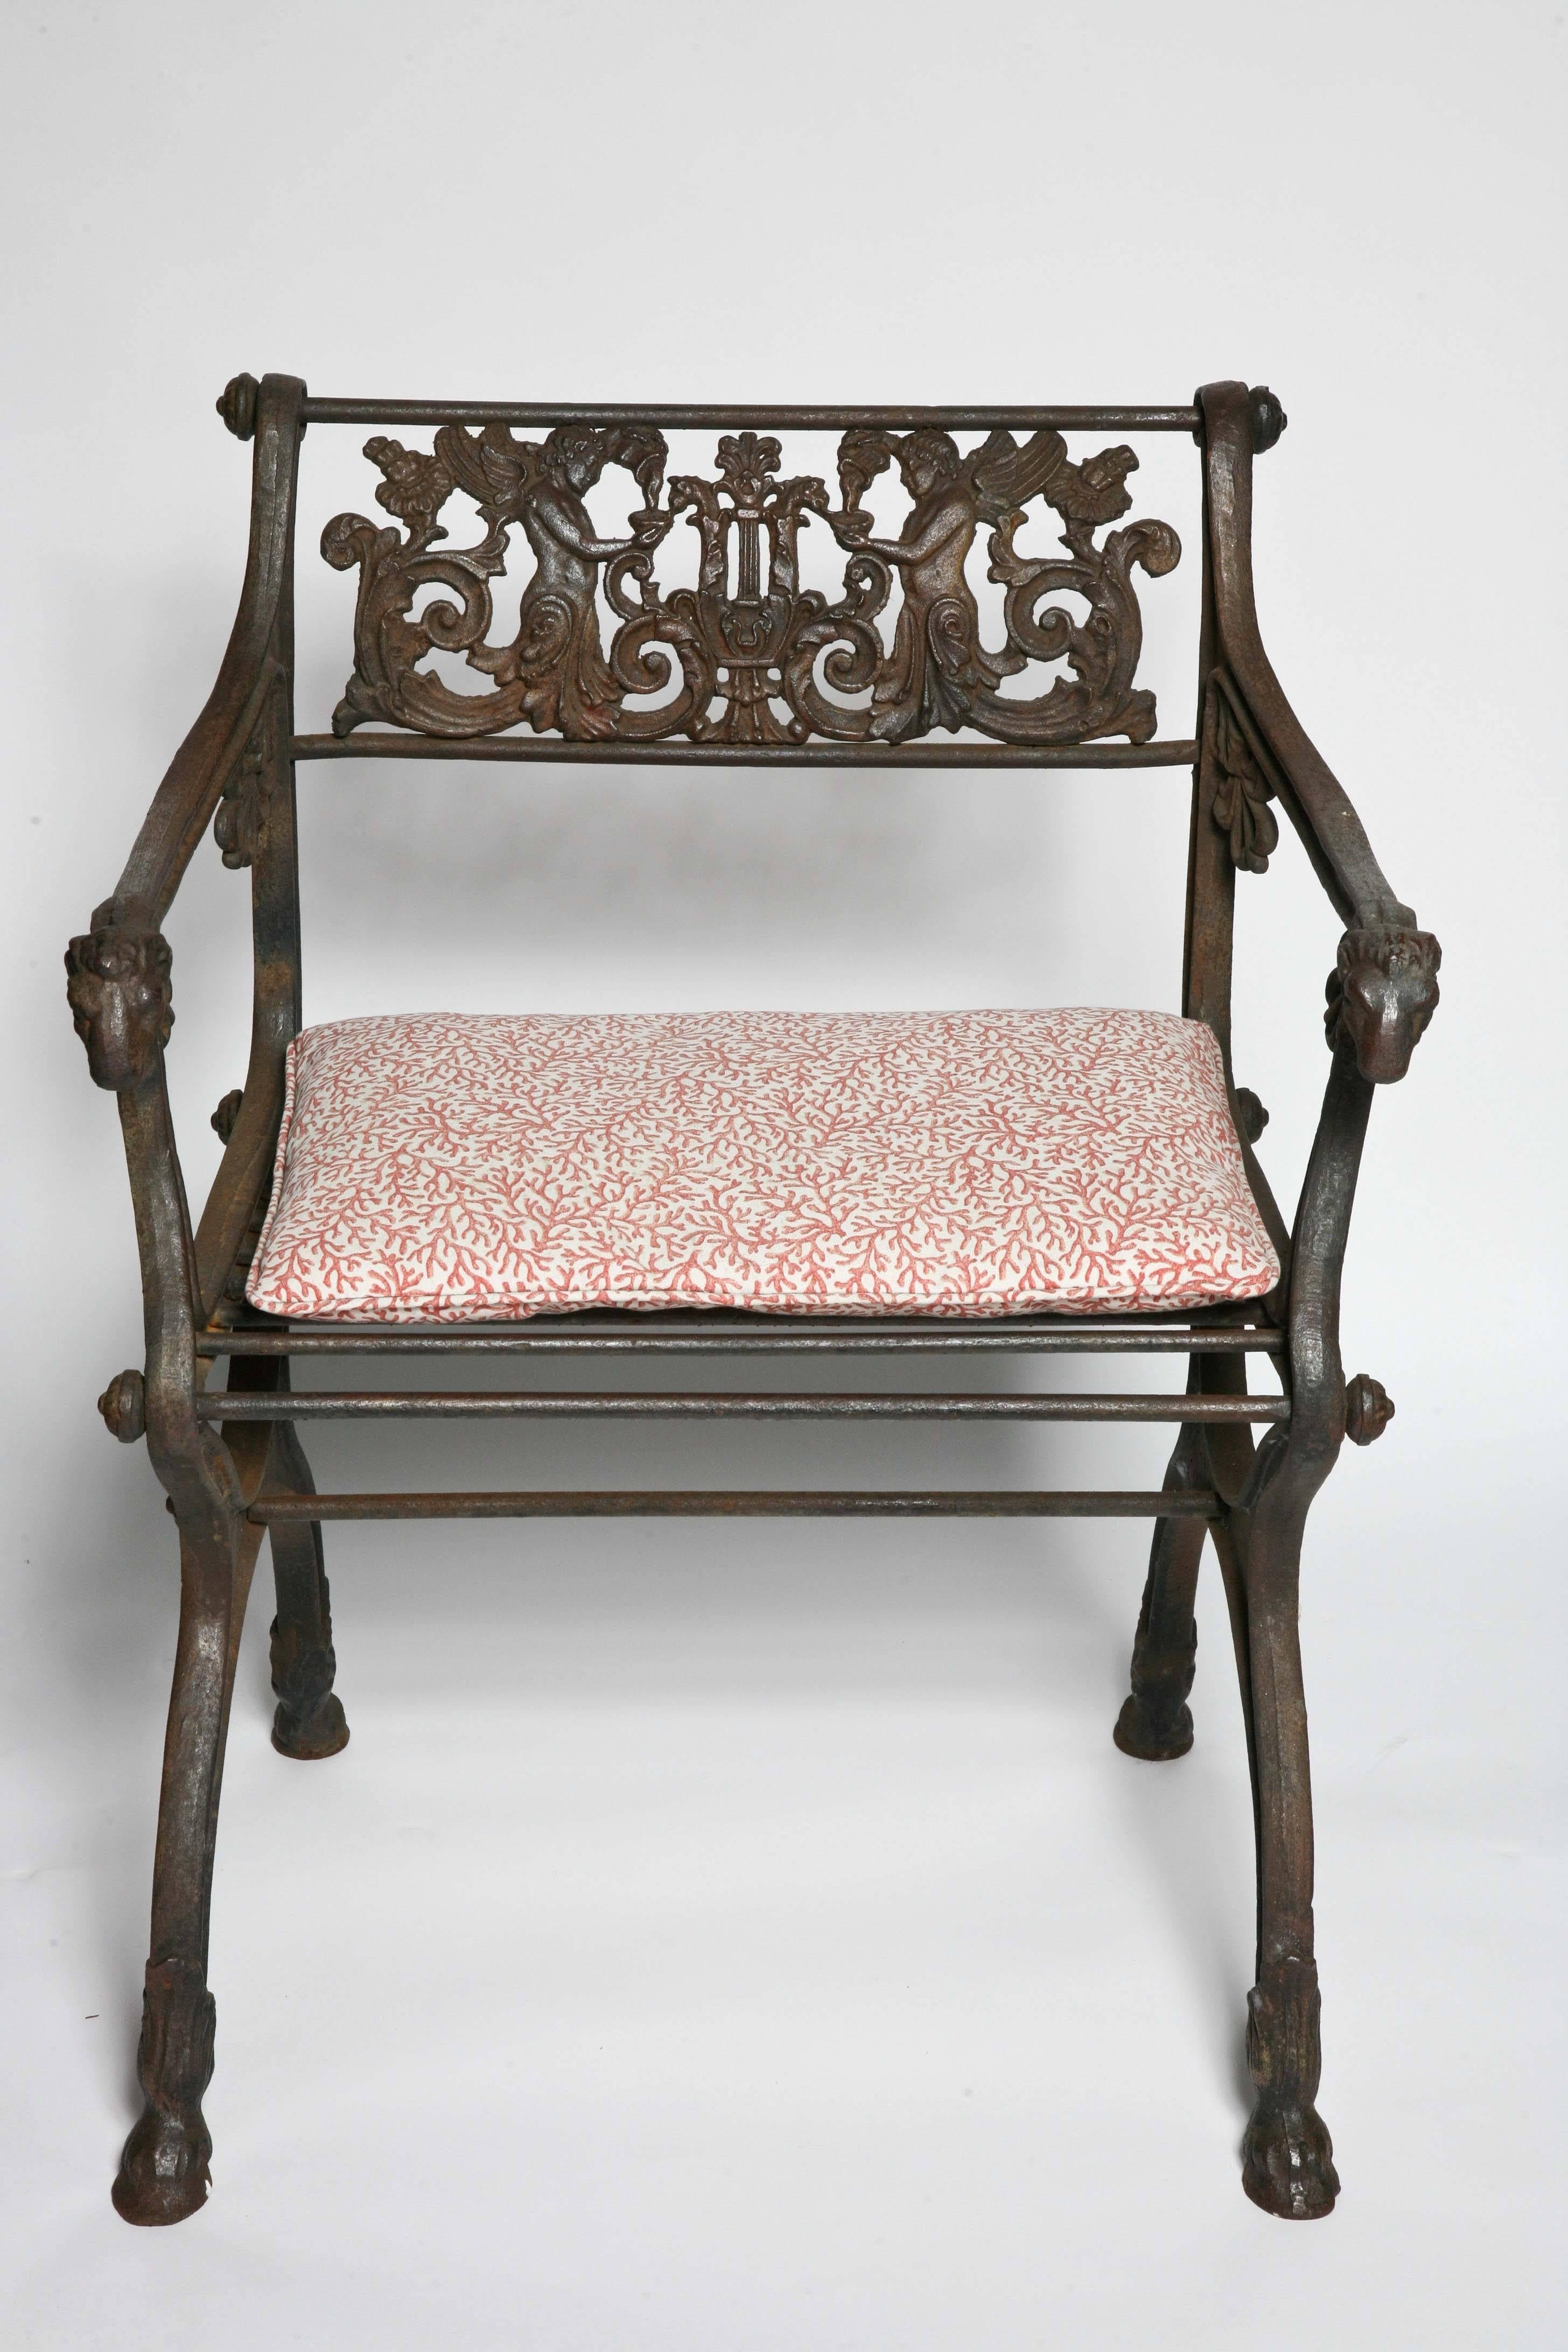 Pair of heavy cast iron arm chairs, classical design with winged cherubs adorning the back rest and arm rest adorned with 